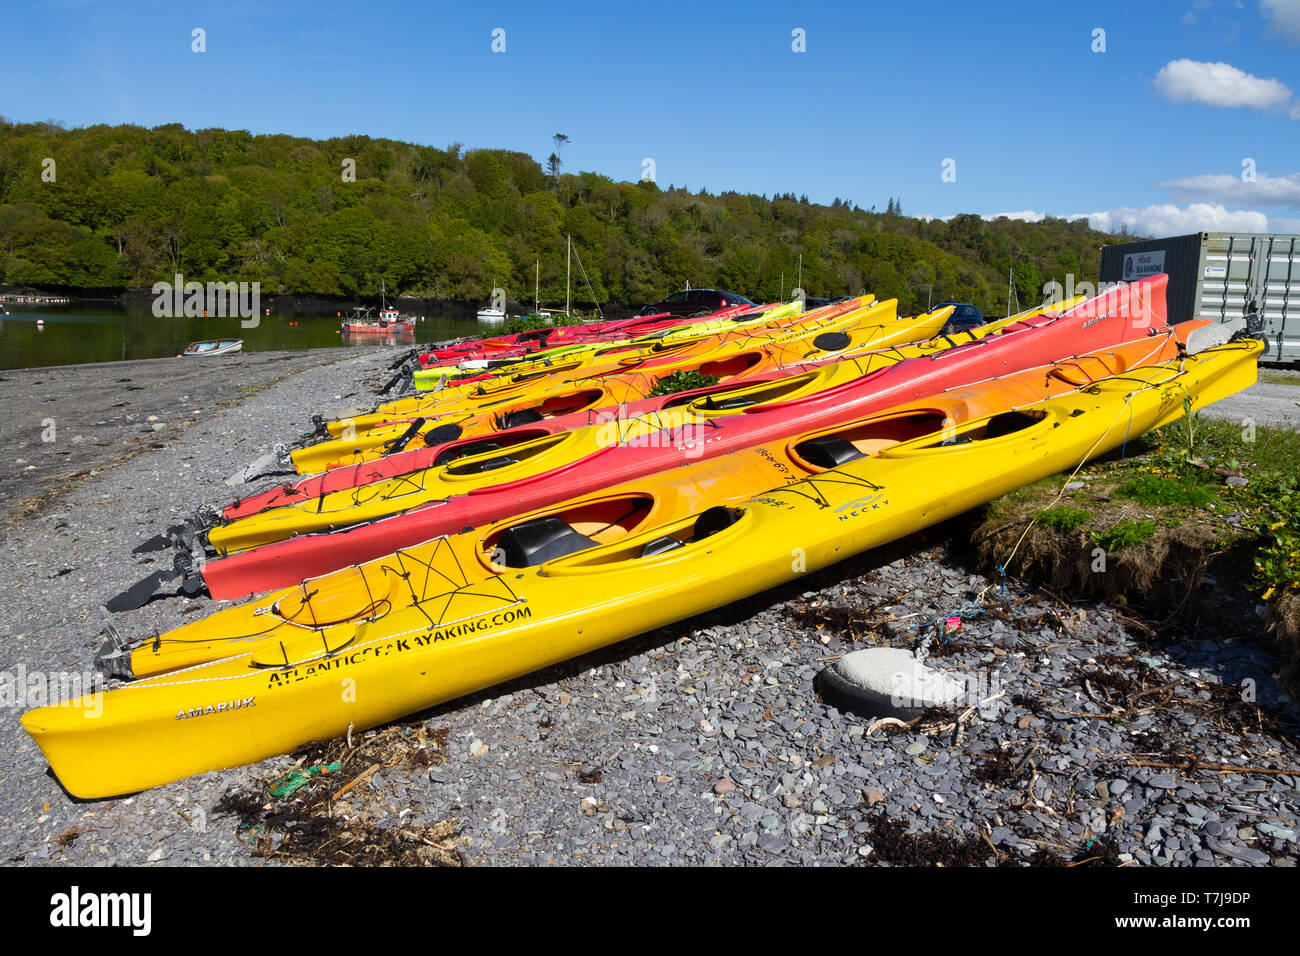 Rows of Kayaks pulled up on a shingle beach after a days paddling Stock Photo